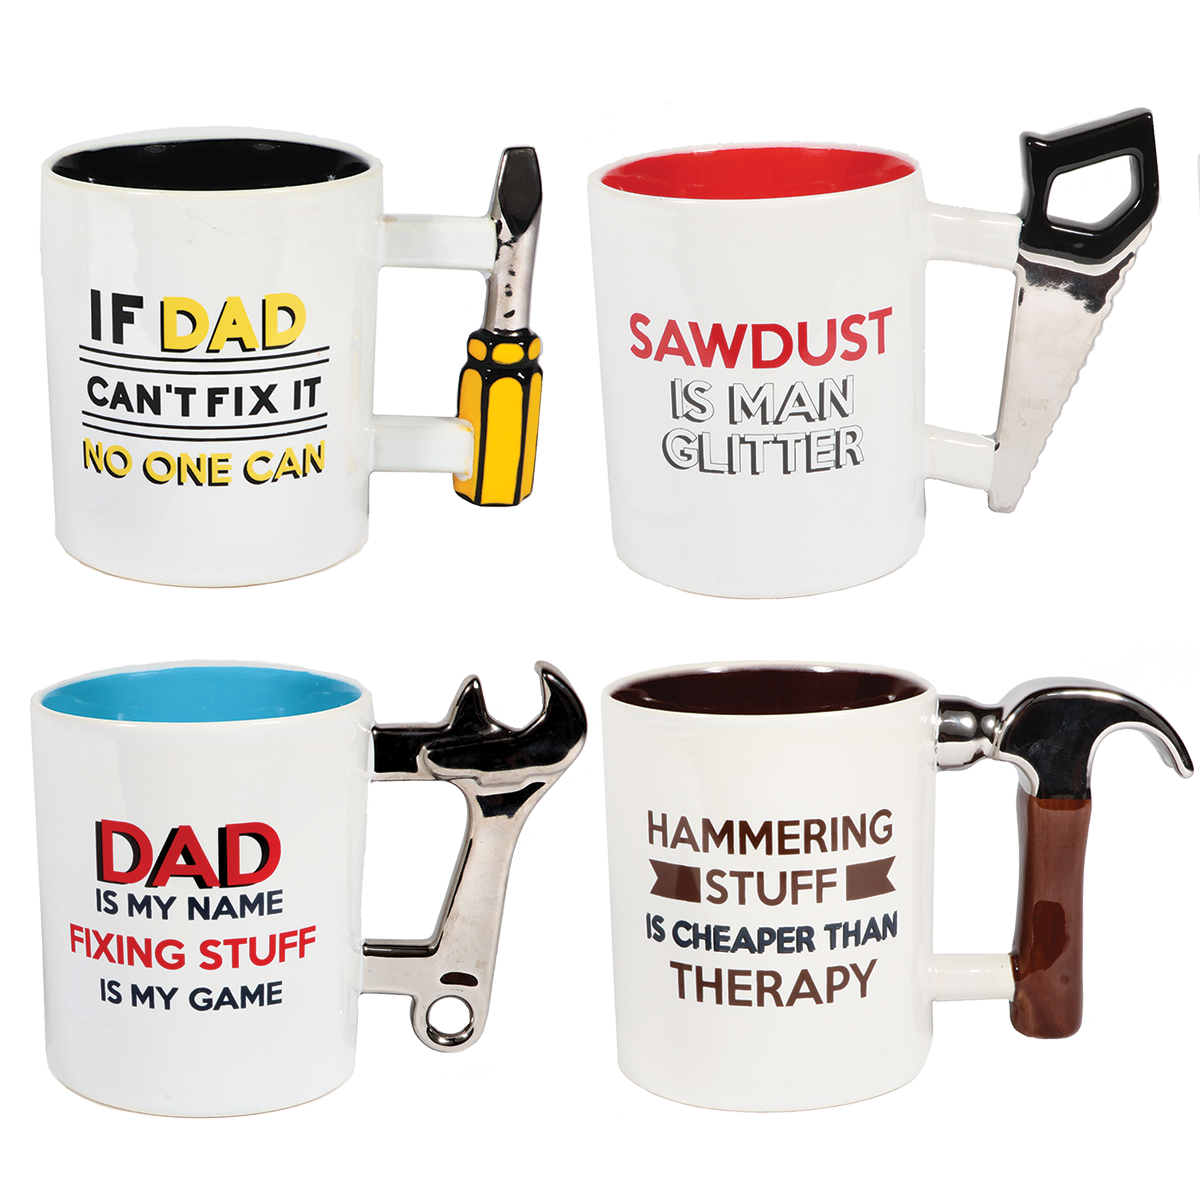 HAMMERING STUFF IS CHEAPER THAN THERAPY HAND TOOLS SAYING MUGS 20